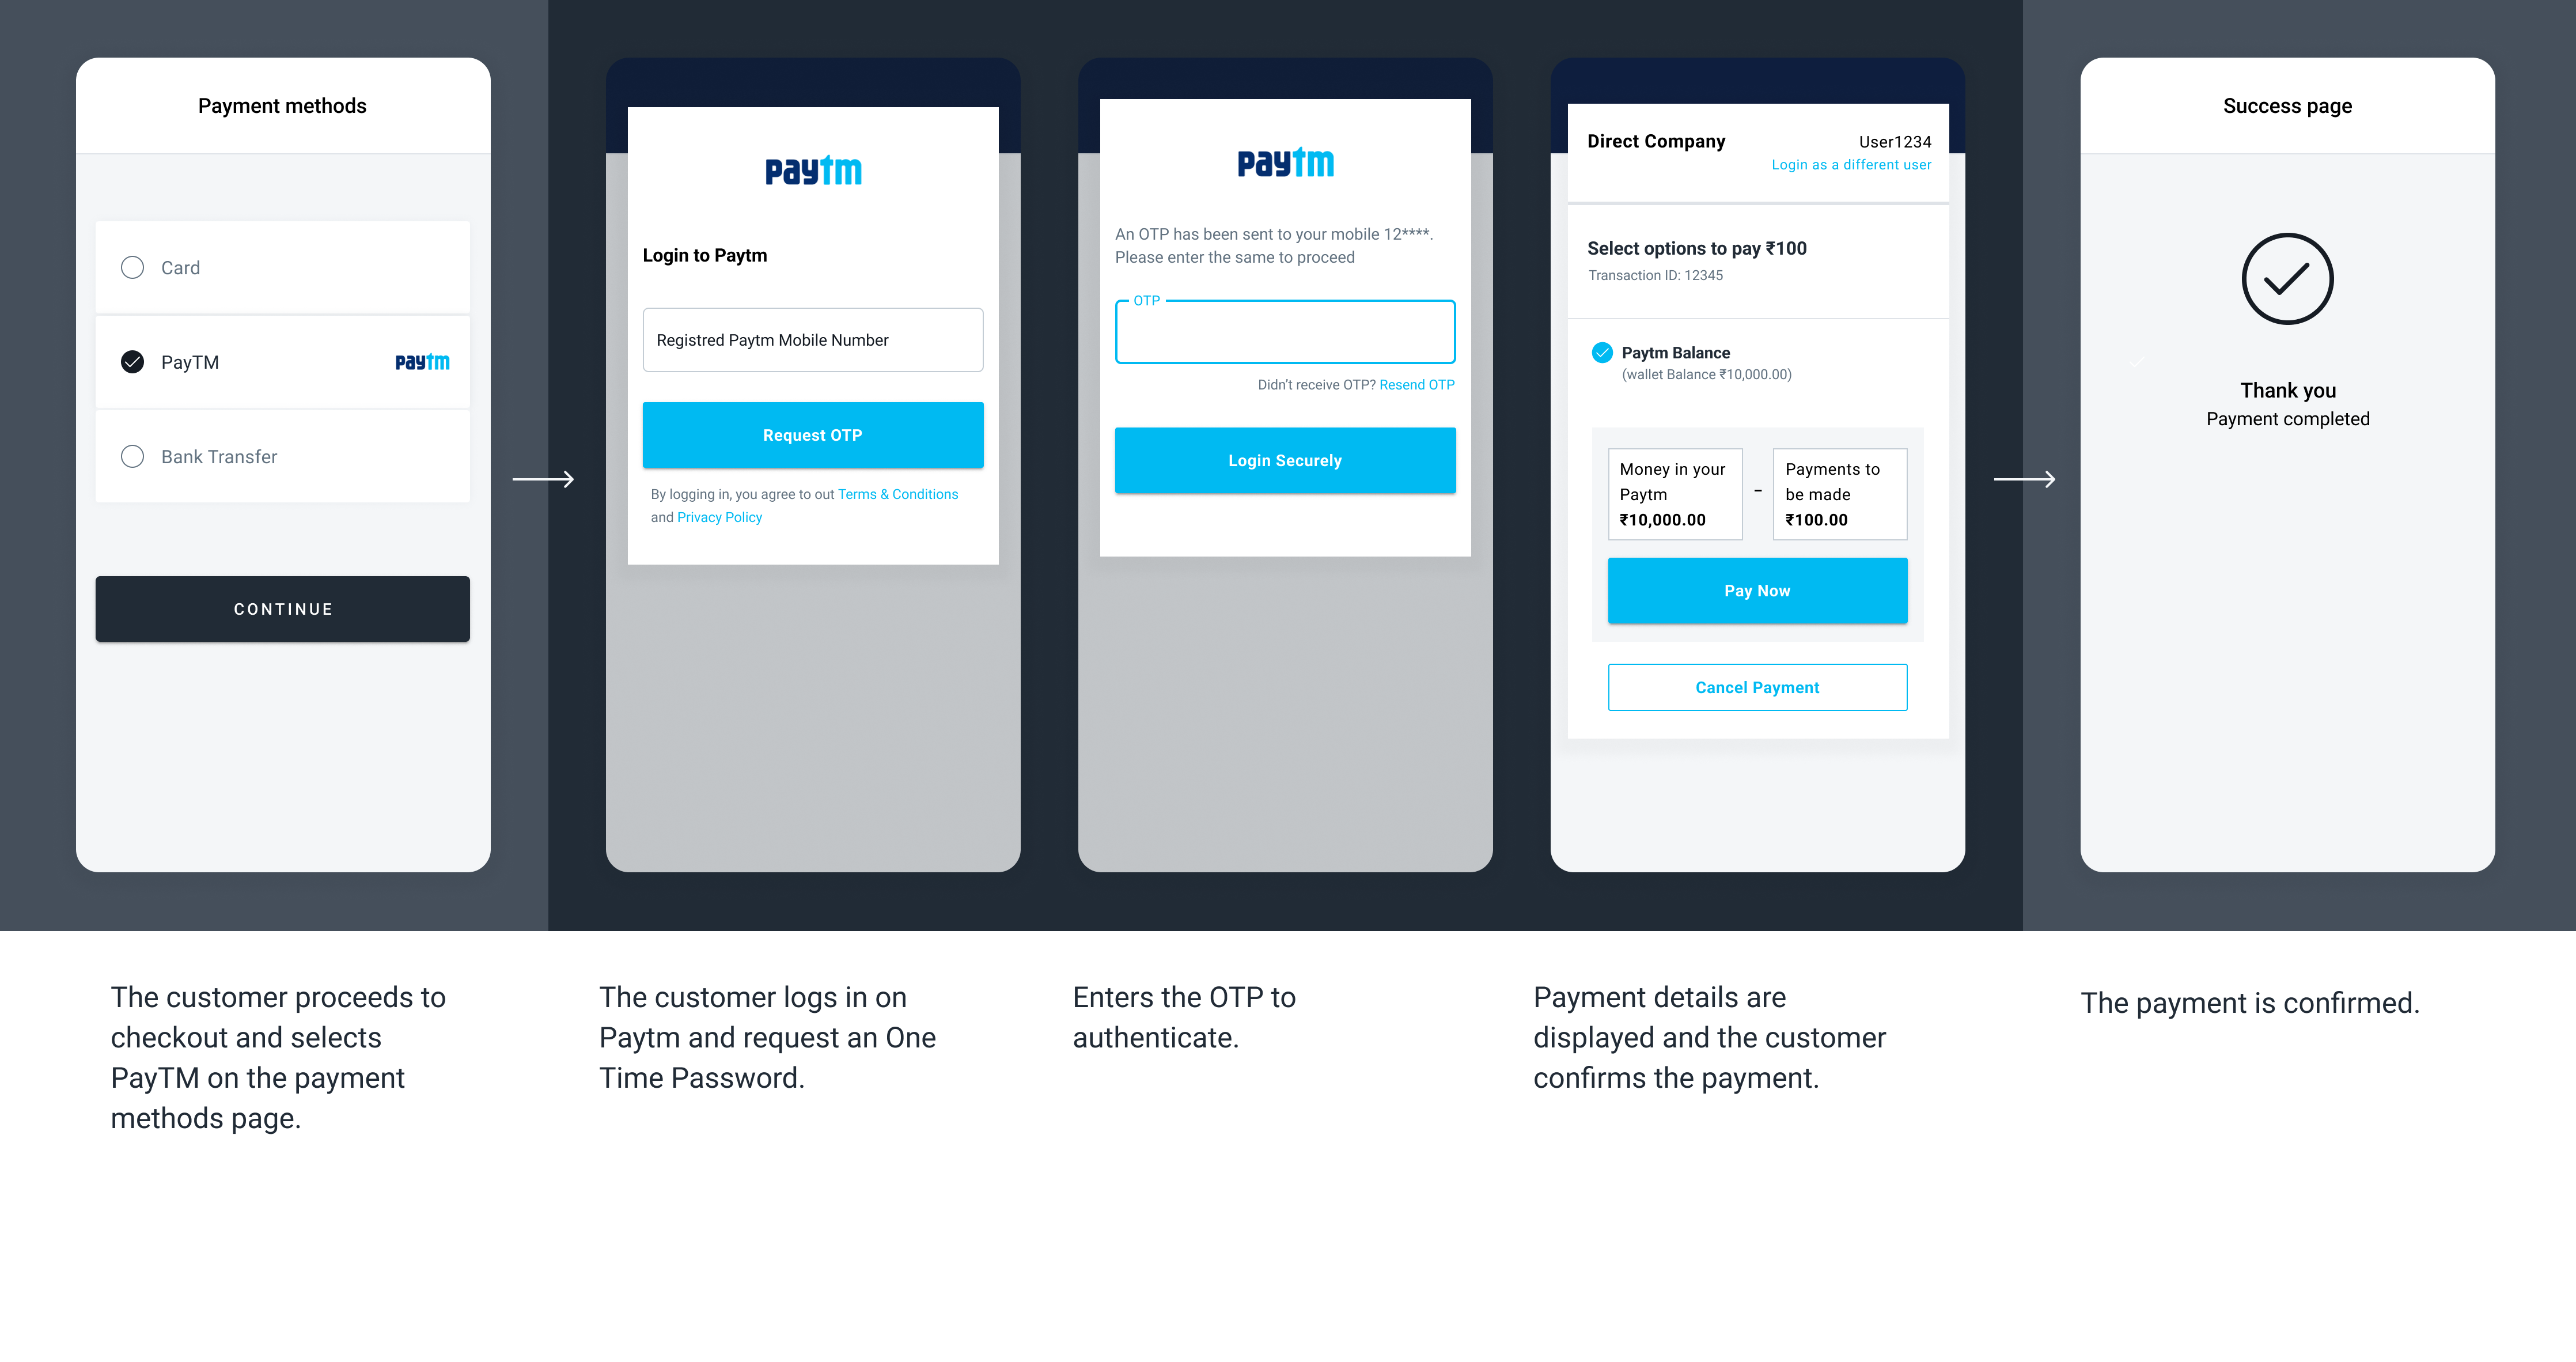 The screenshots illustrate a generic PayTM Wallet redirect flow.